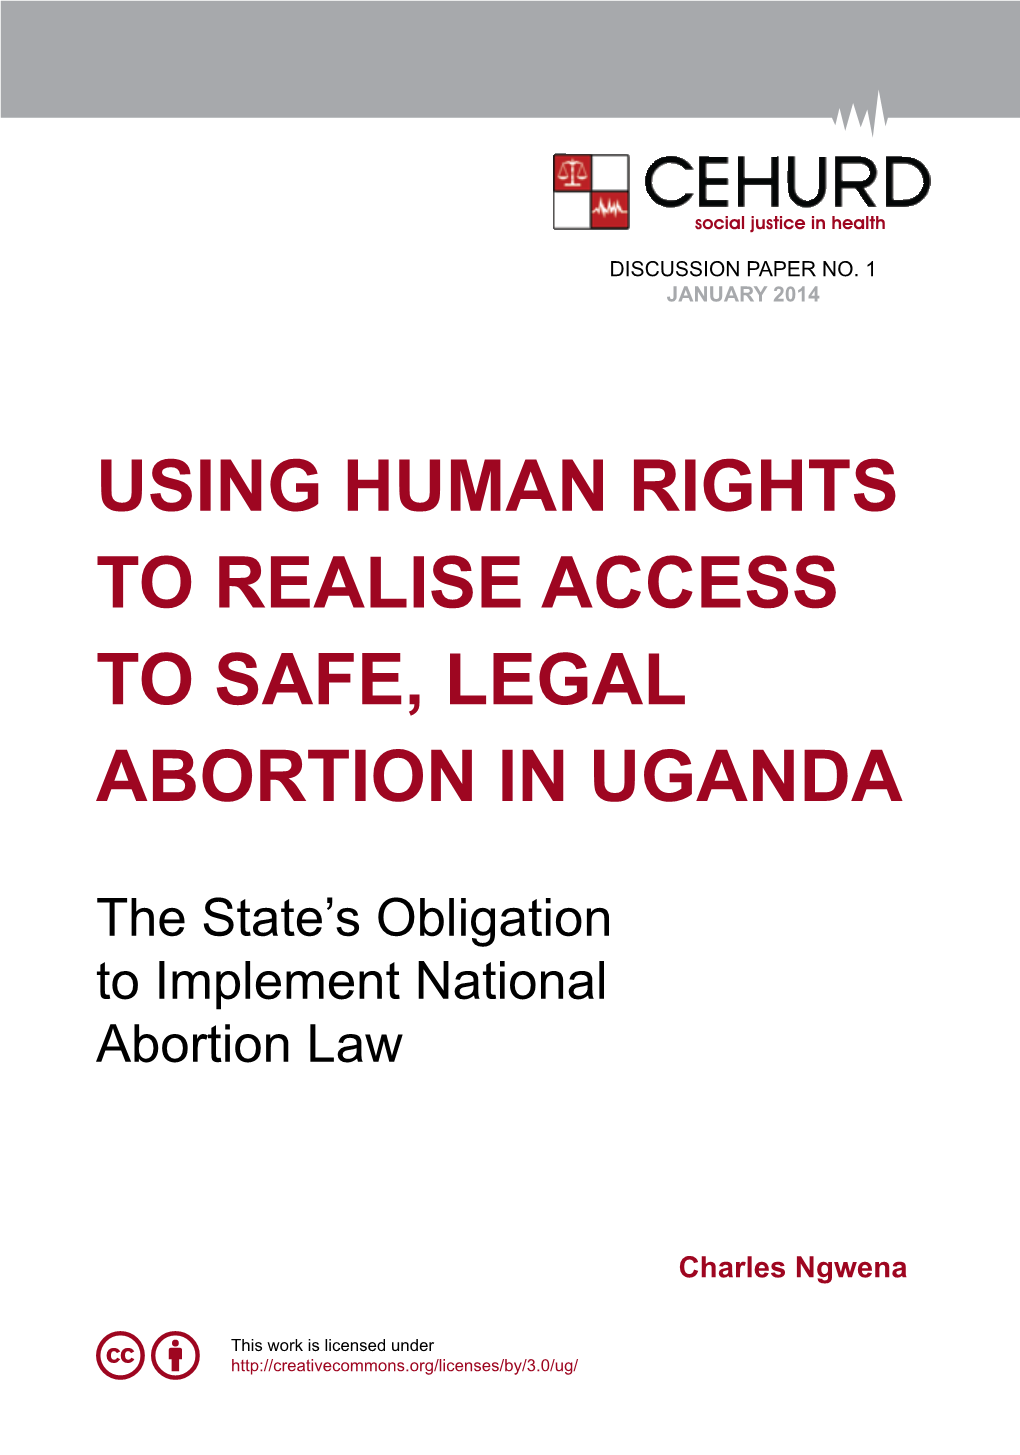 Using Human Rights to Realise Access to Safe, Legal Abortion in Uganda